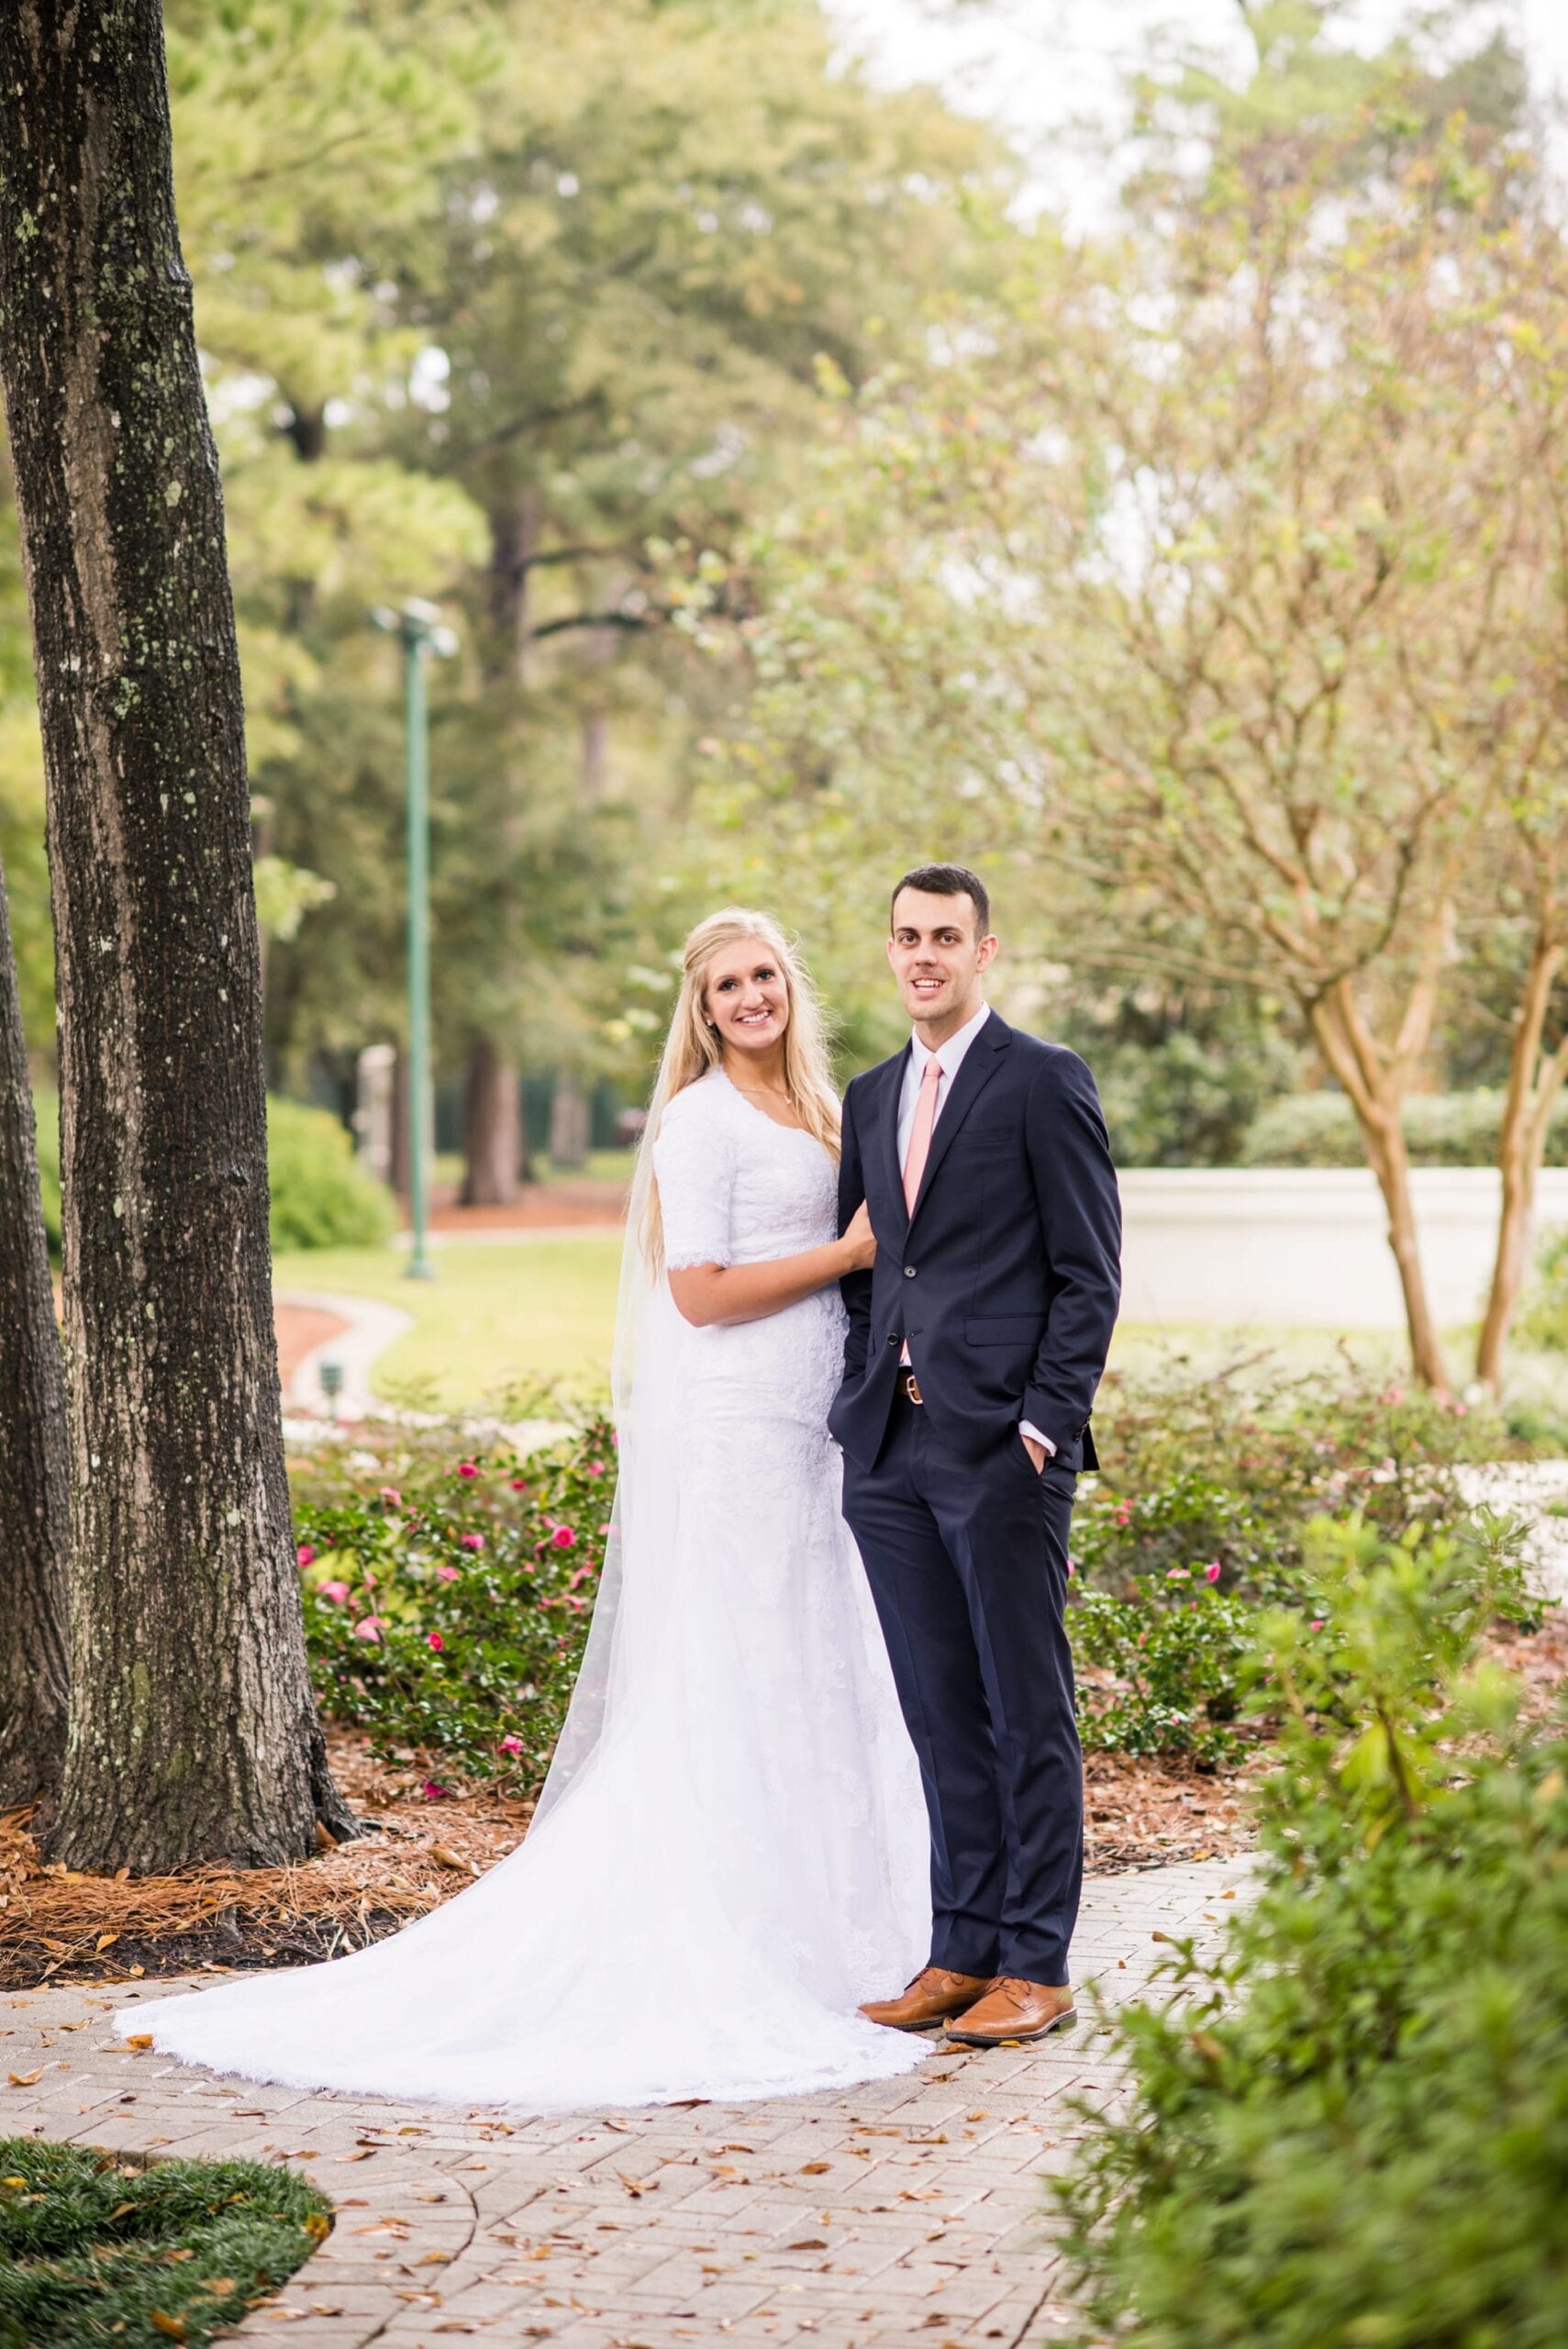 Texas Country Wedding by Michelle & Logan_0067